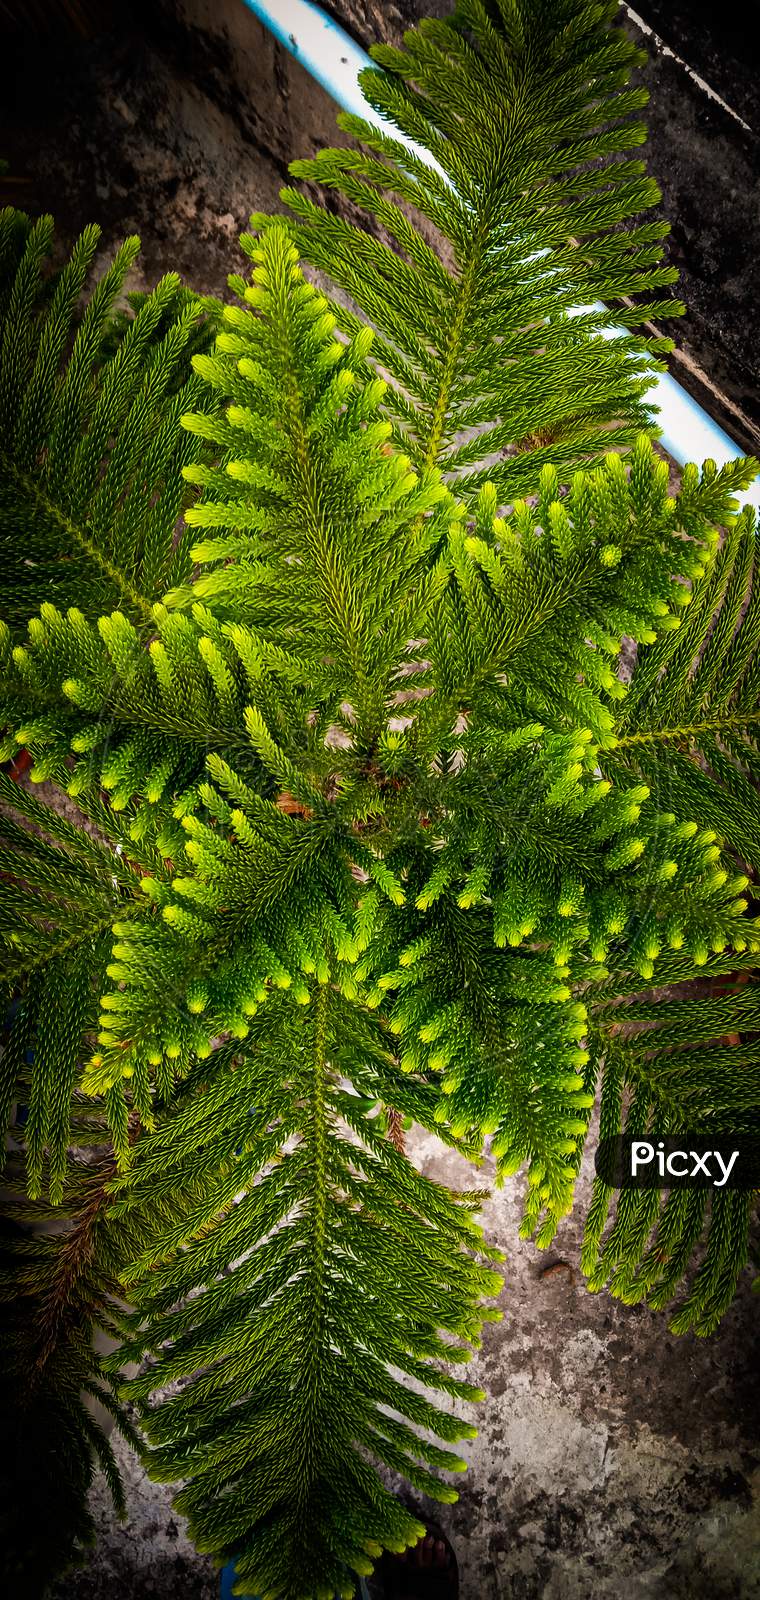 A different perspective of clicking the shot of a fern